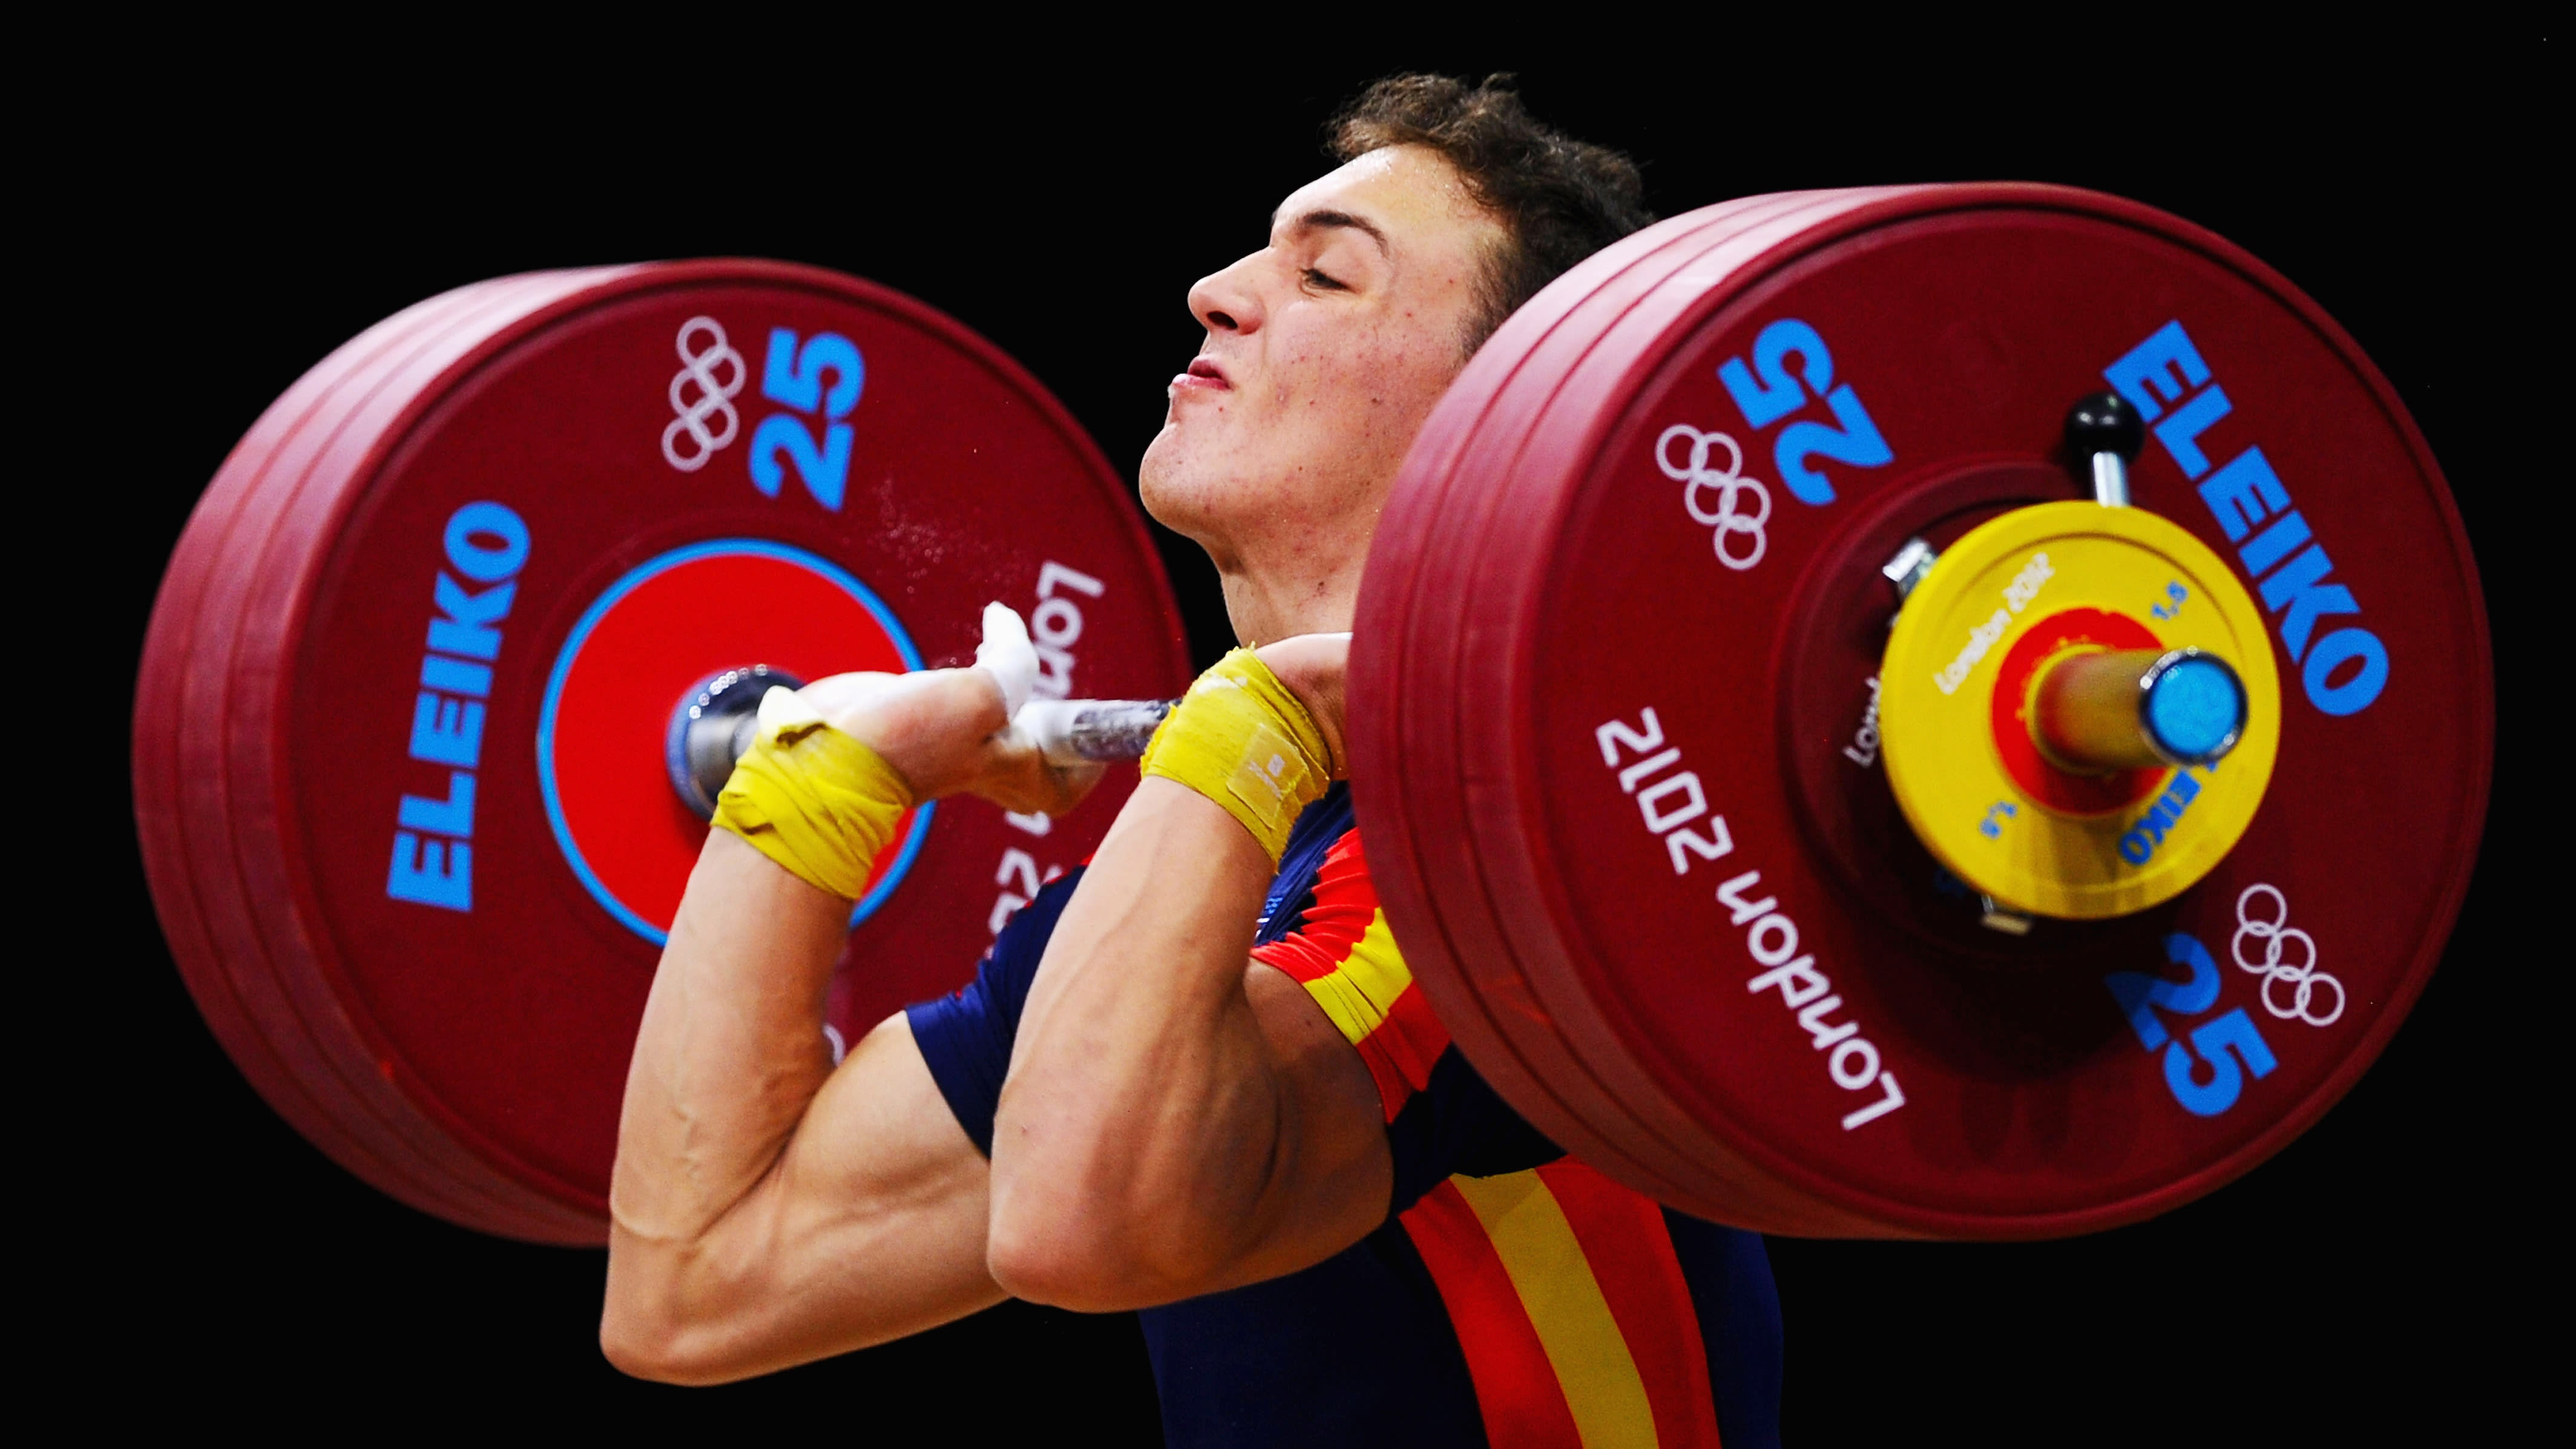 2022 World Weightlifting Championships in Bogota Schedule, how to watch and preview